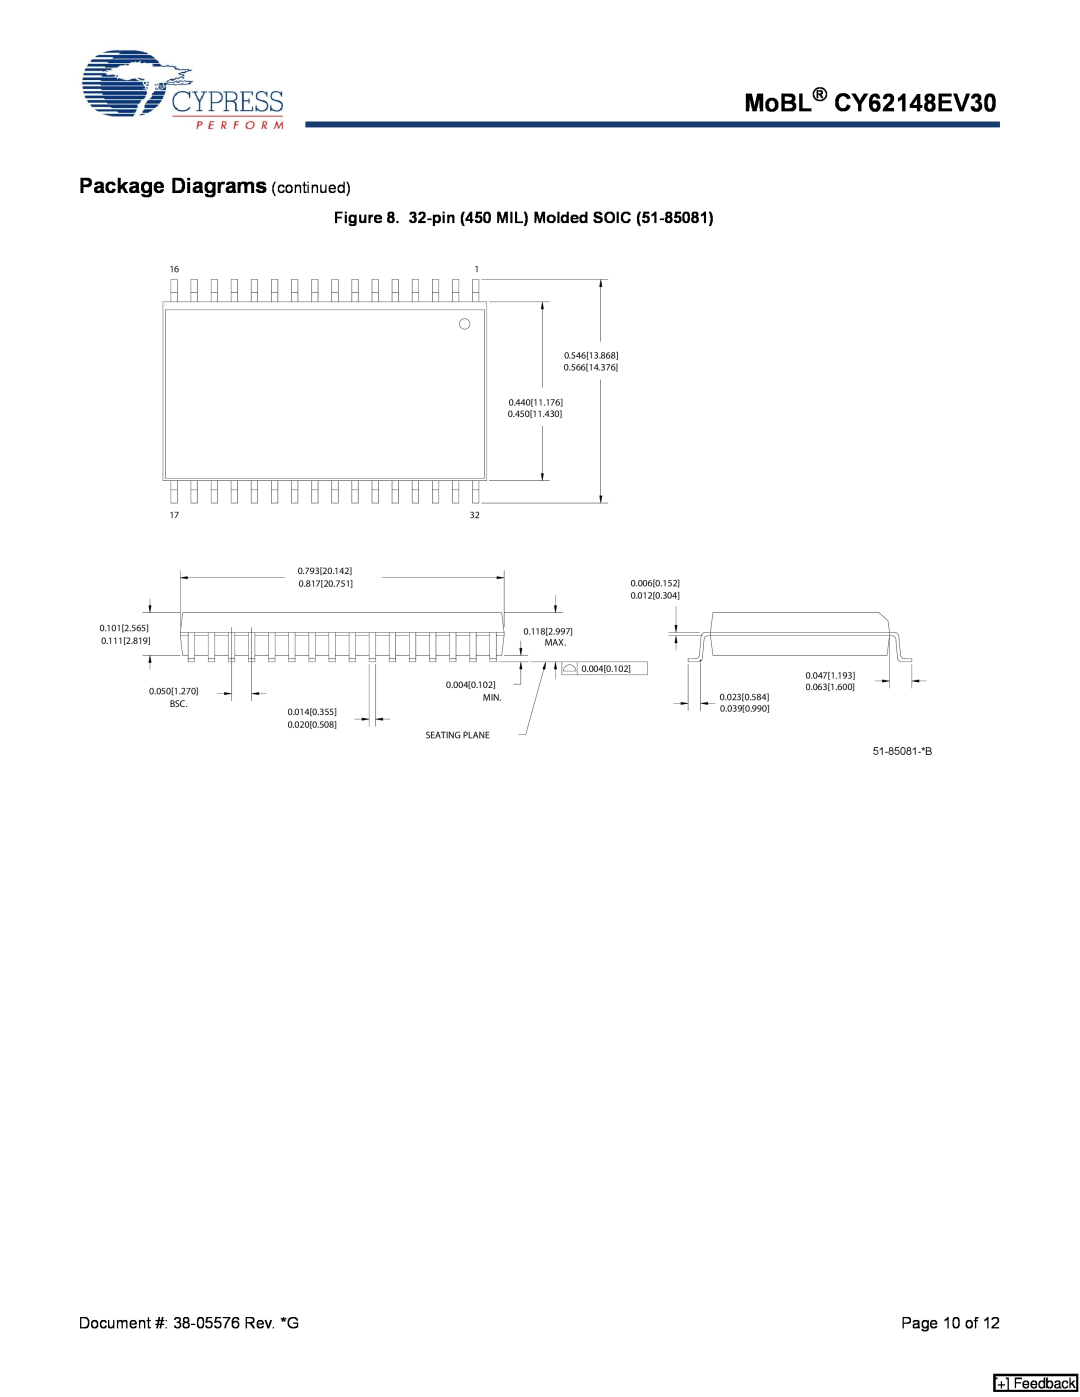 Cypress manual 32-pin 450 MIL Molded SOIC, MoBL CY62148EV30, Package Diagrams continued, Page 10 of, + Feedback 